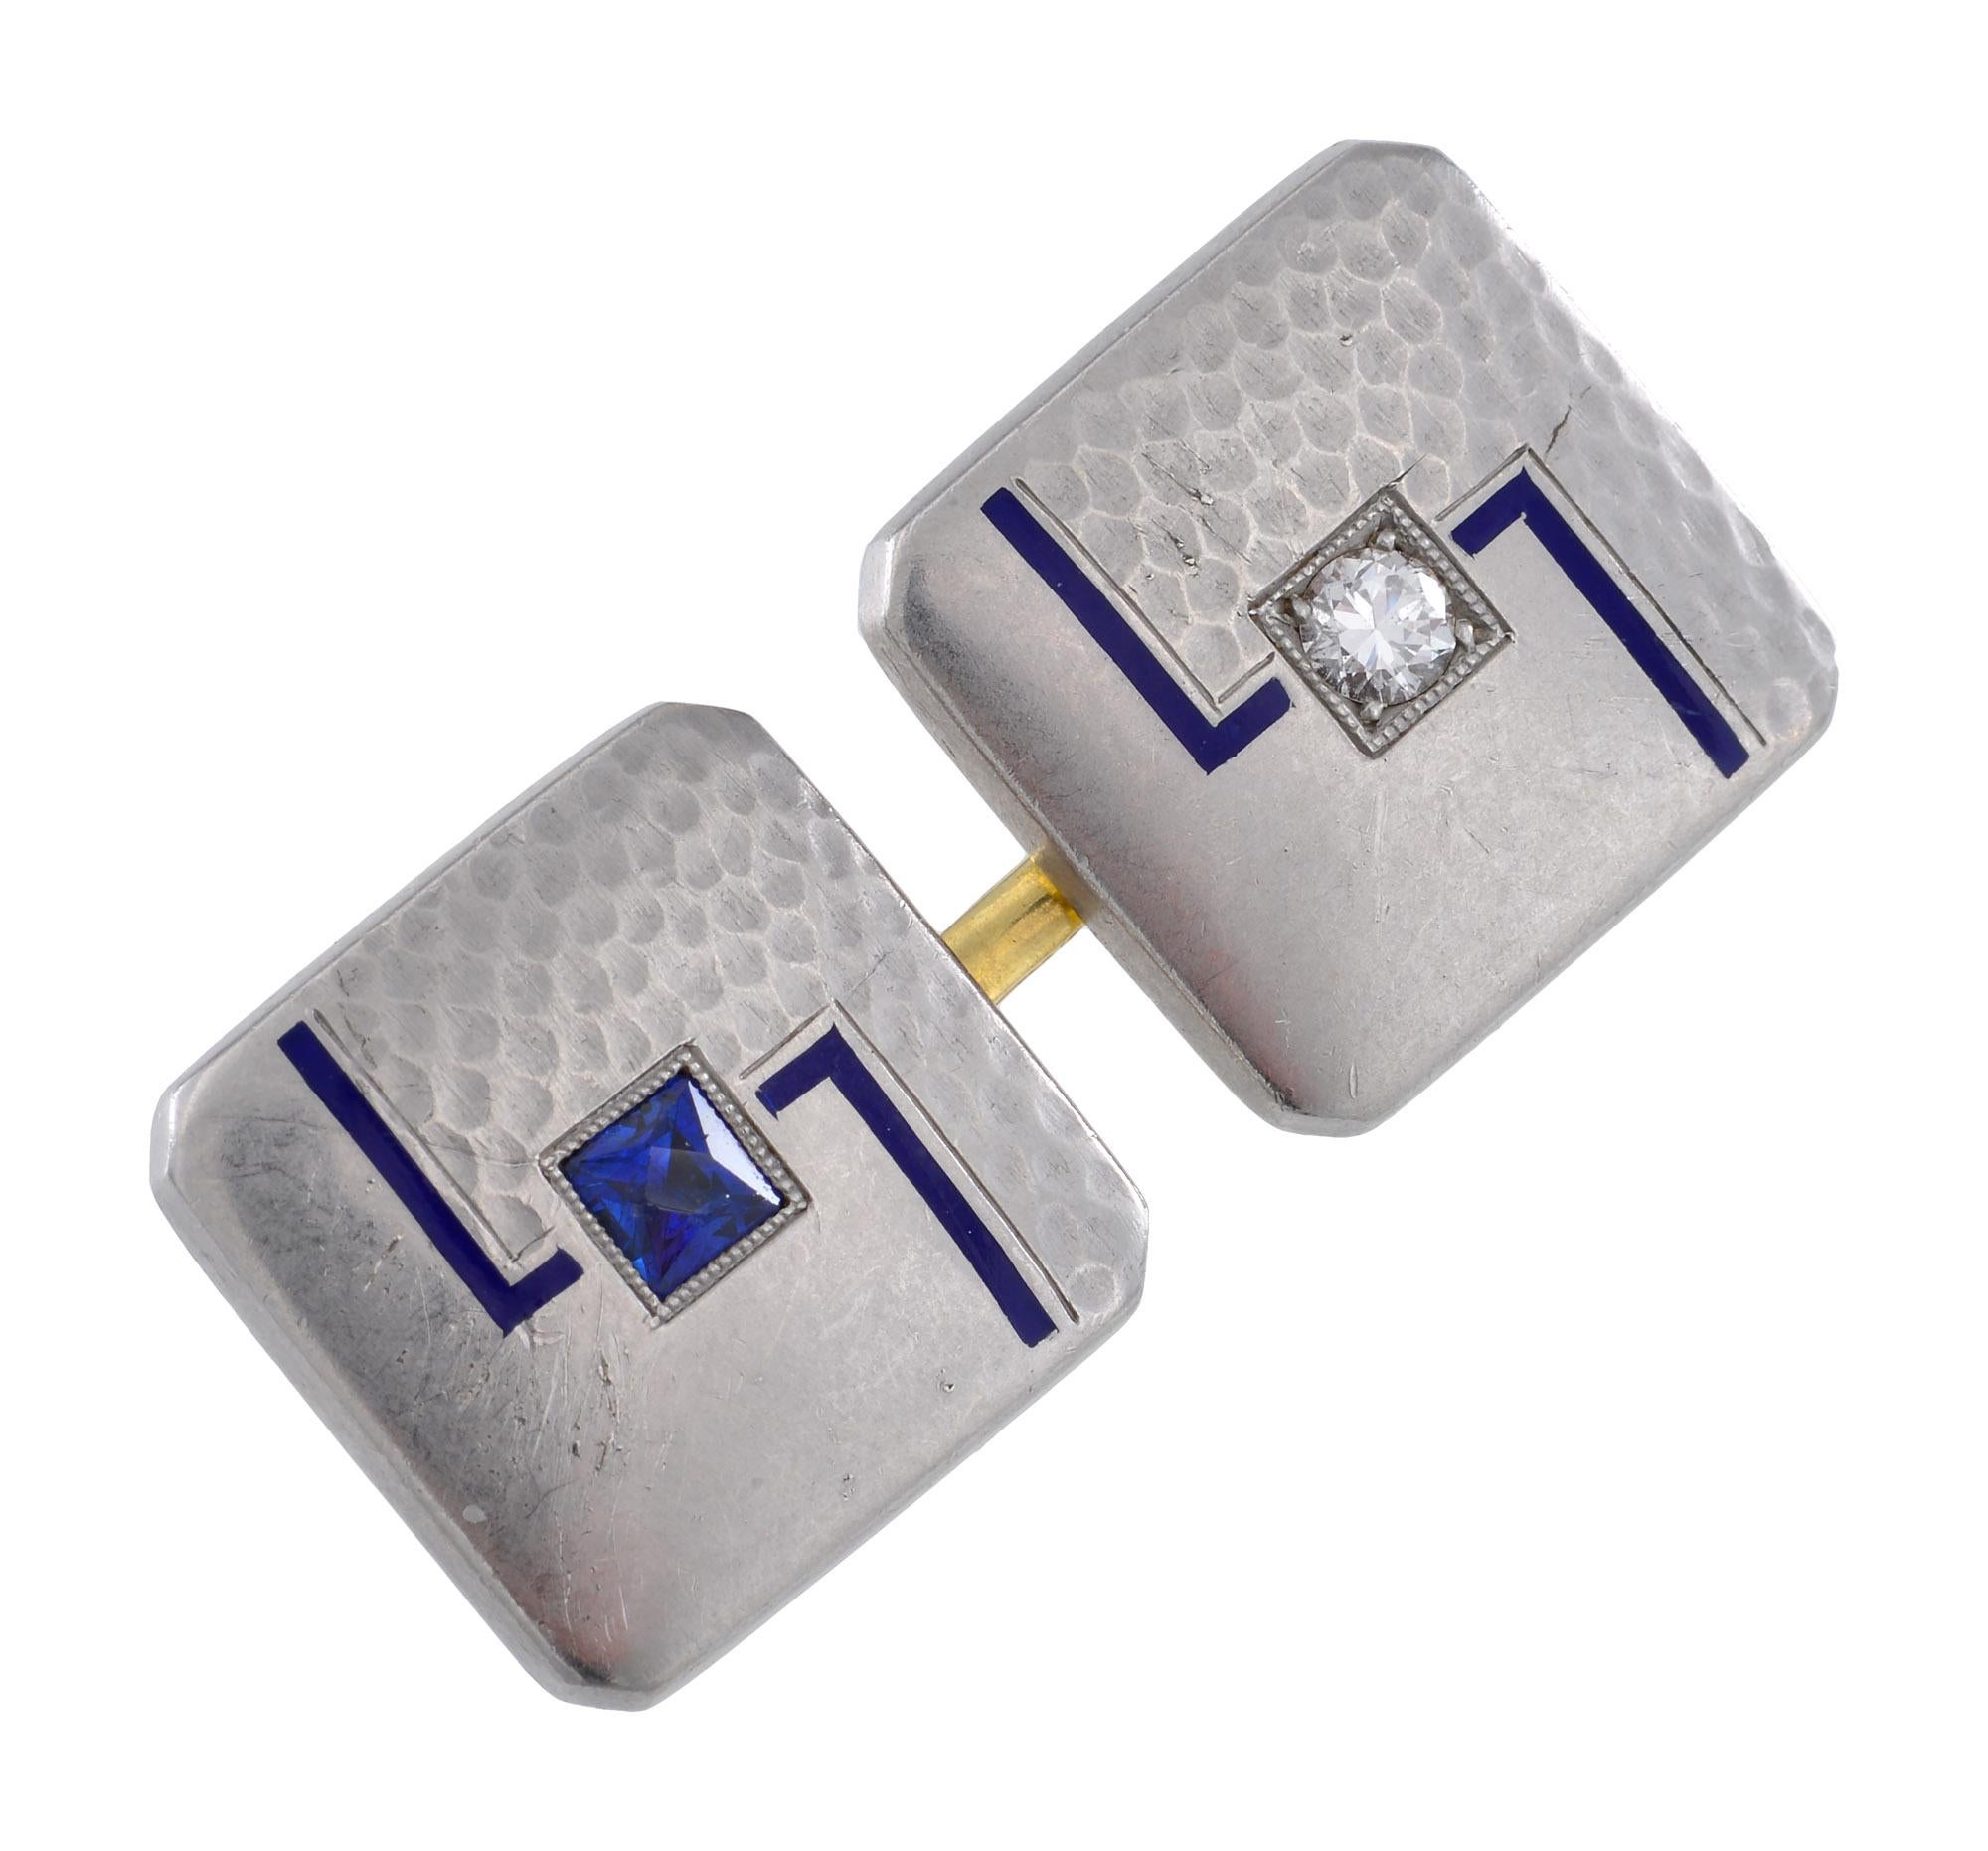 Chic pair of Art Deco Sapphire , Diamond  ,Enamel and Platinum on gold double cufflinks each set with square cut sapphires and diamonds Each segment measures 12.5 x 12.5mm.
Sapphires 3 x 3  mm
Diamonds 0. 05 cts each 
Weight of each cufflink 5.8 gms 